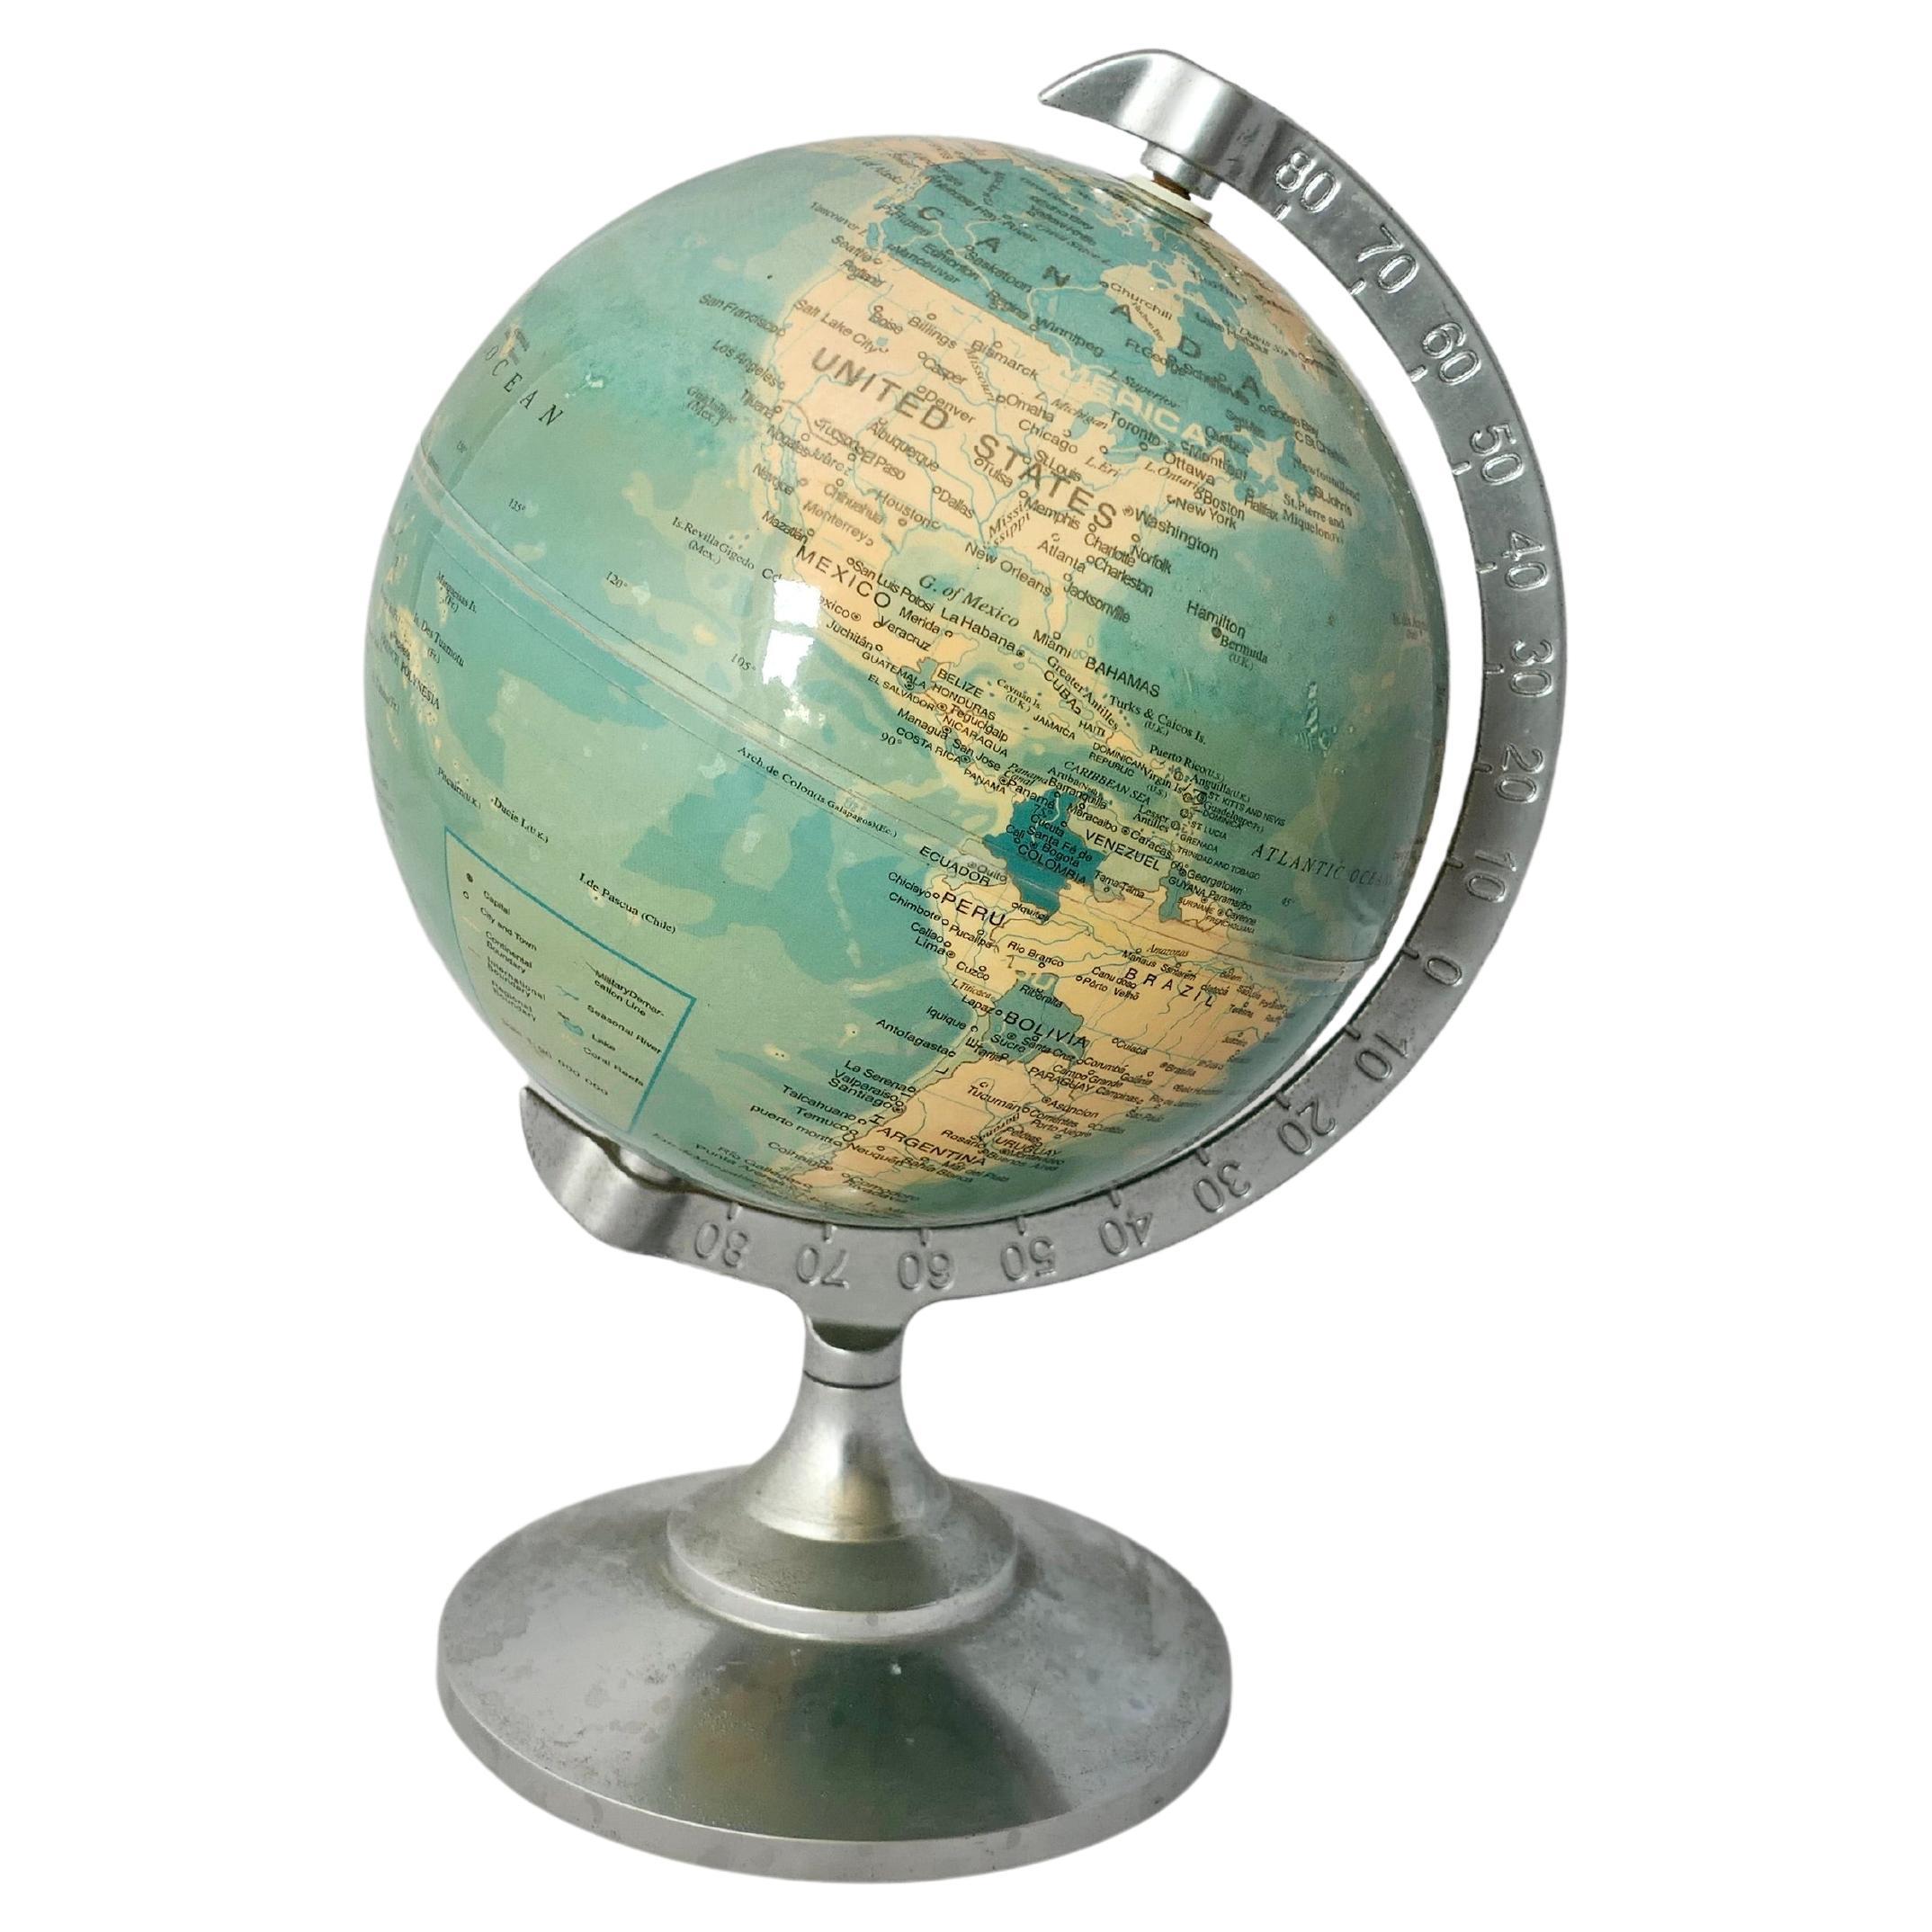  Desk Ornament World Globe with Chromed Stand  A super piece and useful   For Sale